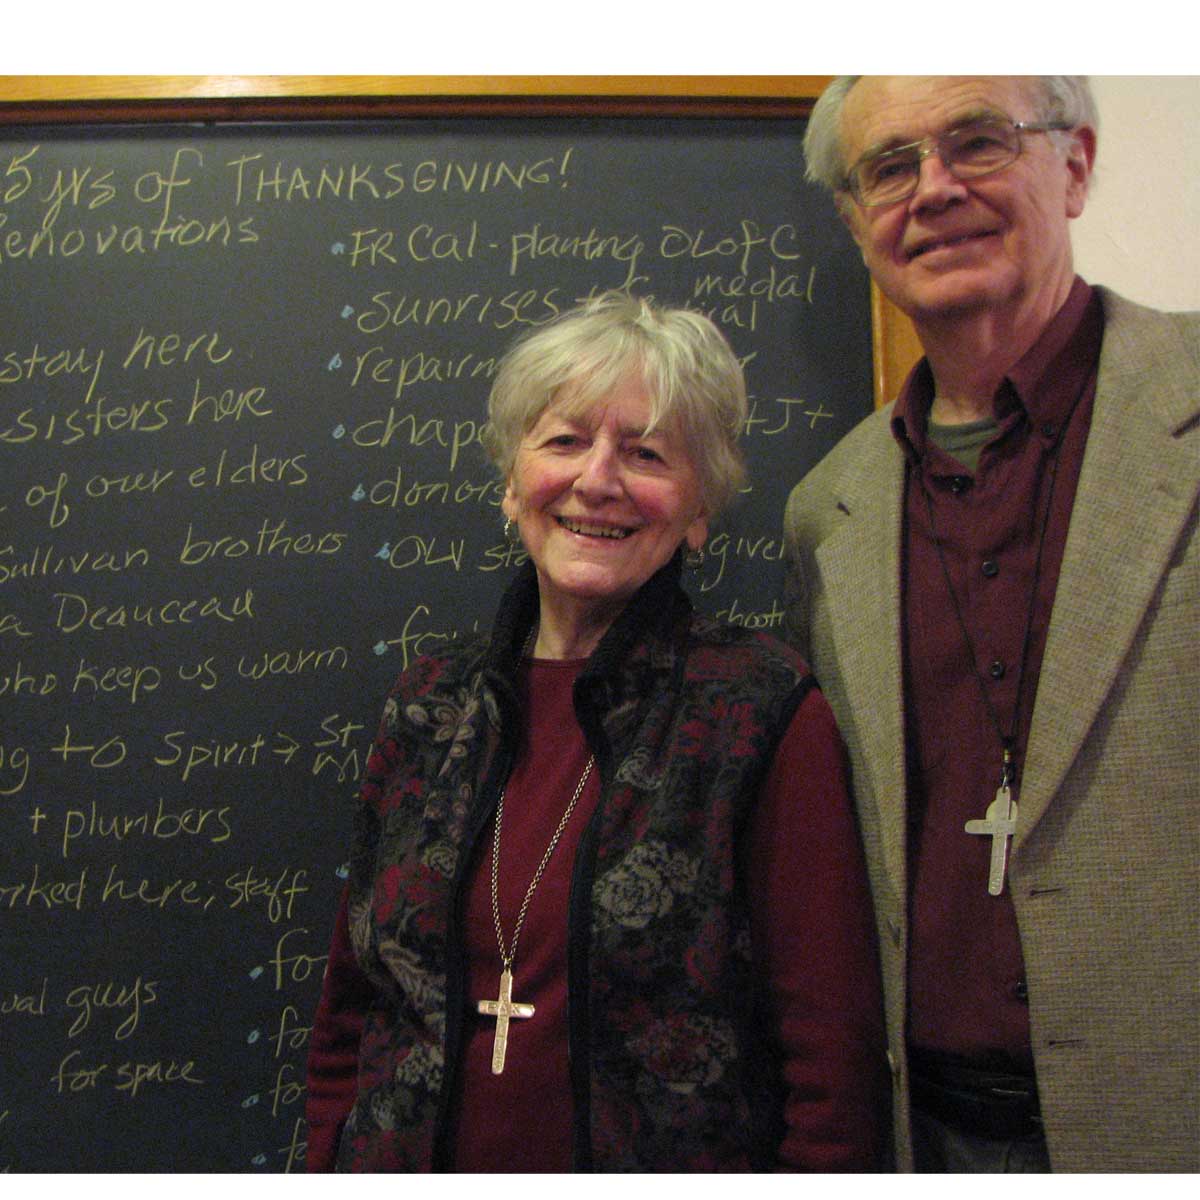 Susanne and Tom, former LDs in front of board cataloging some of the things people are grateful for